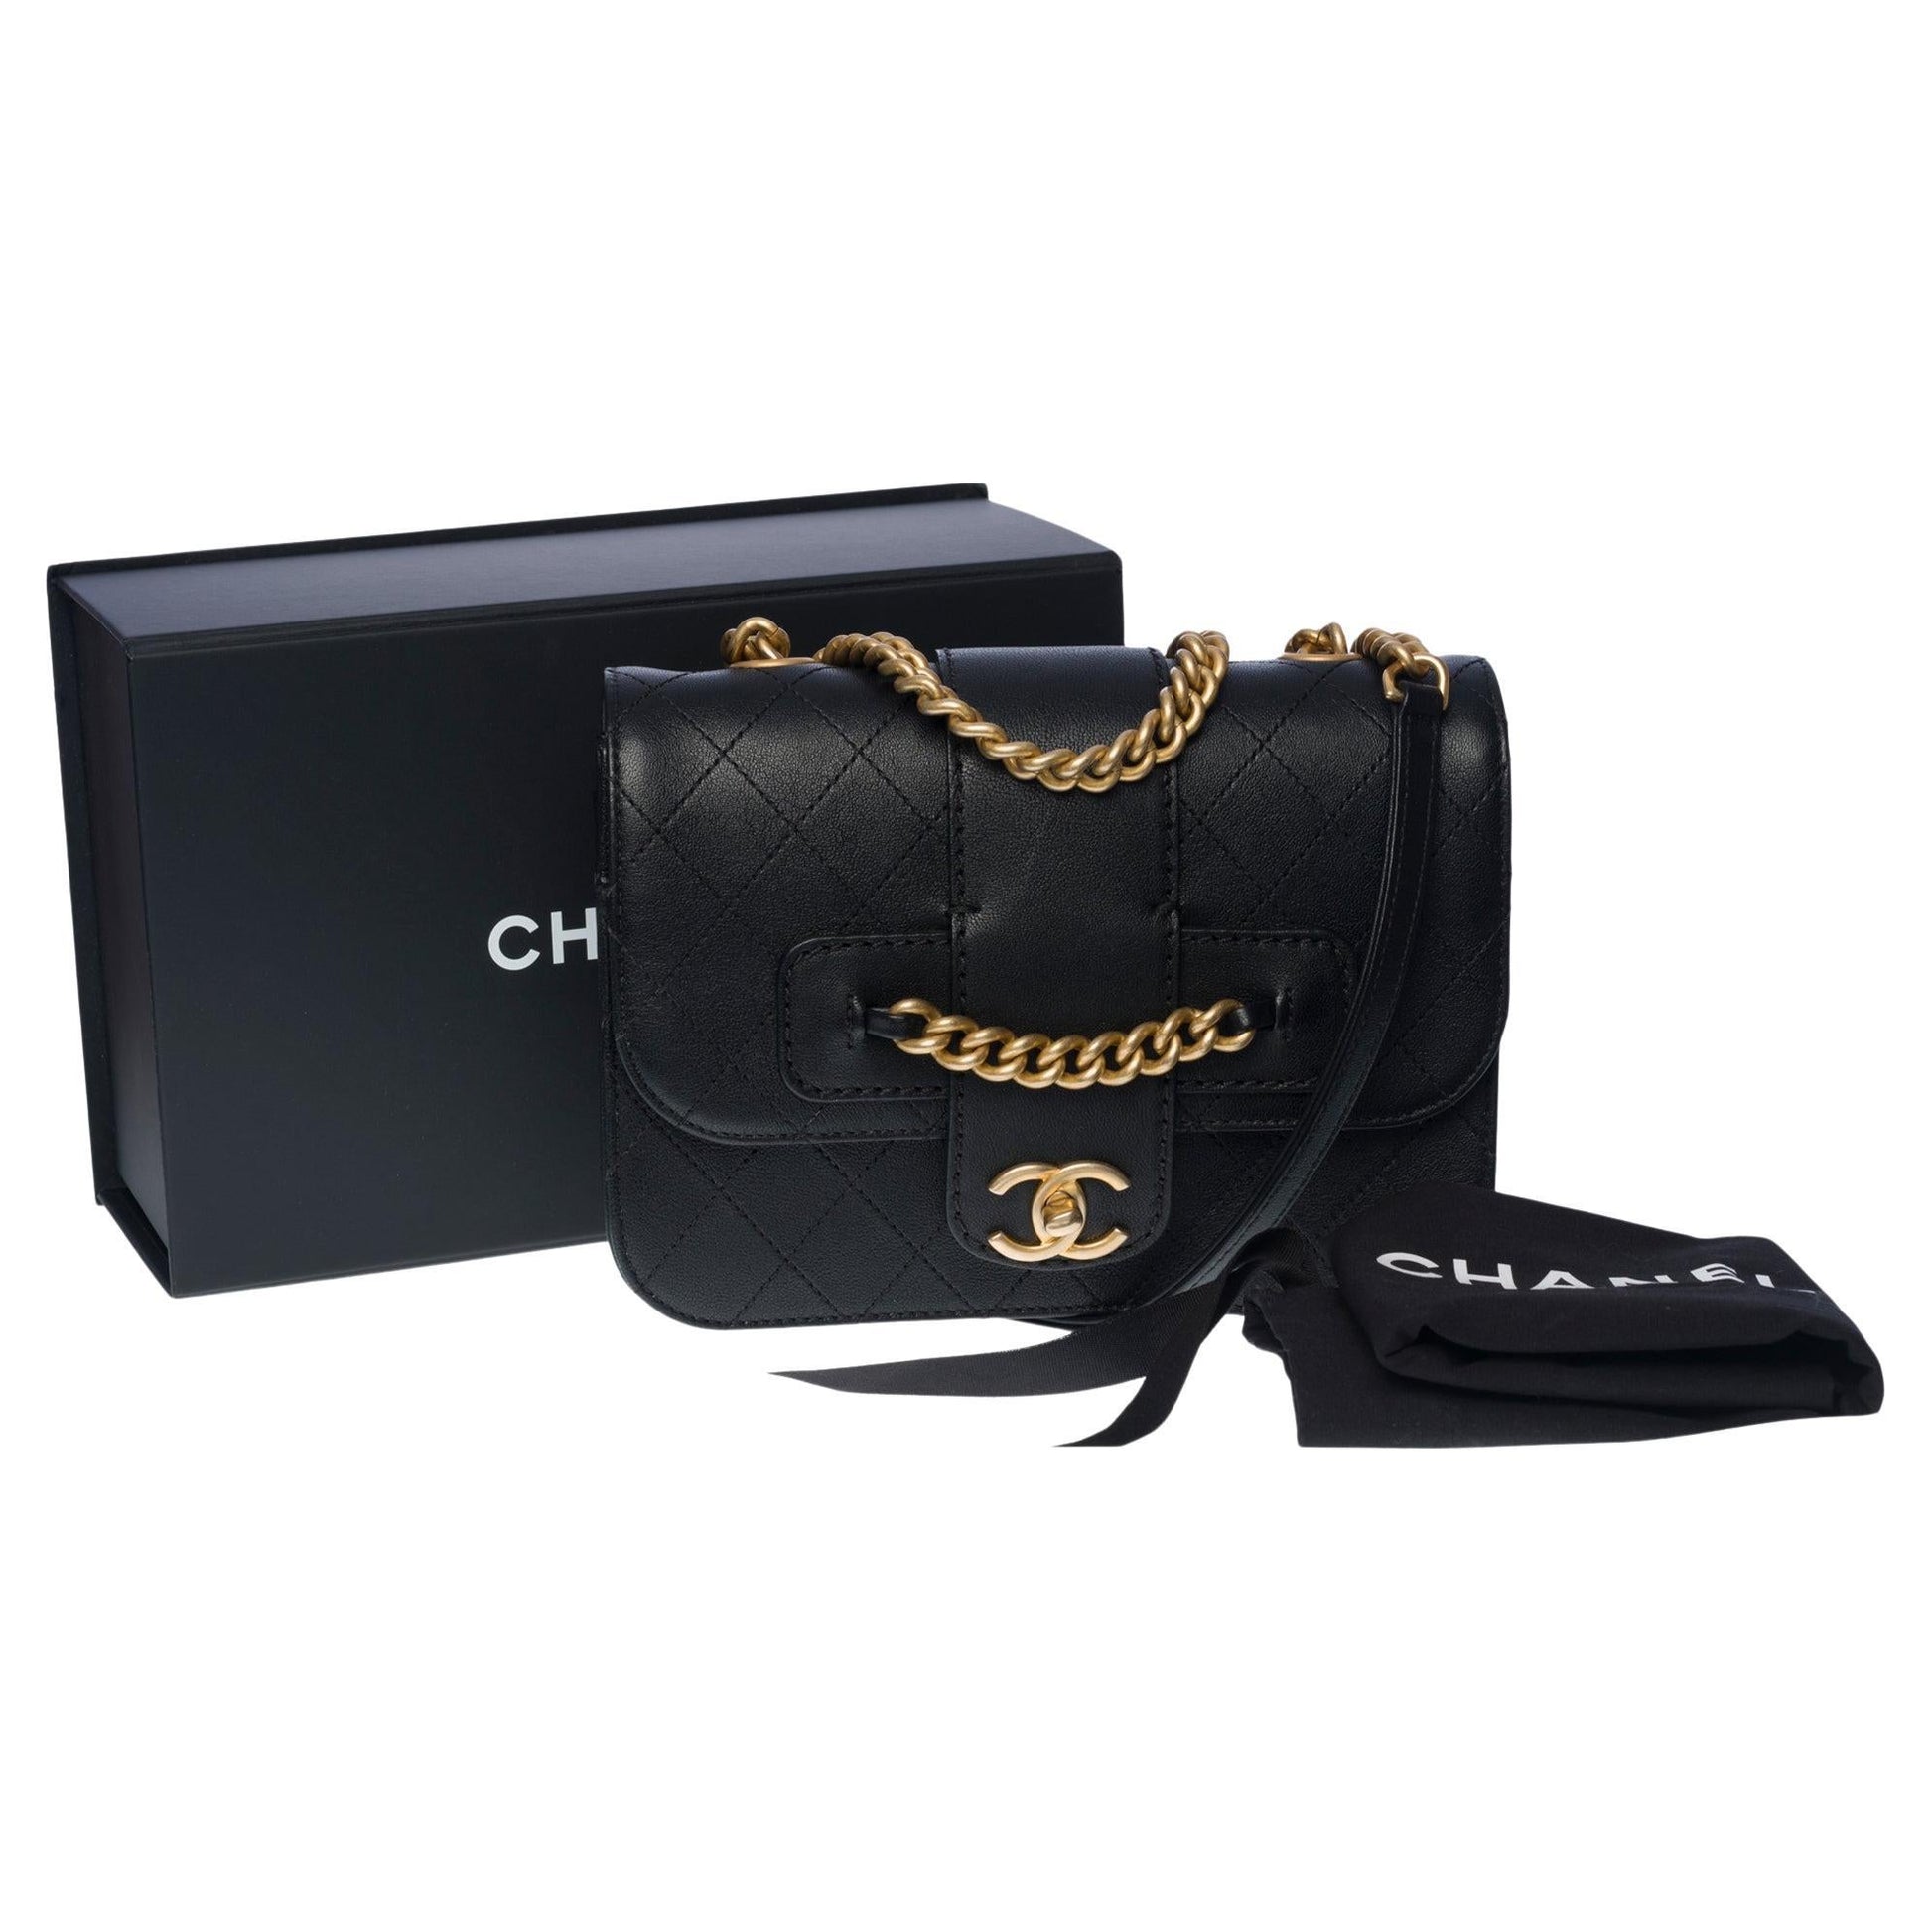 CHANEL Limited Edition Classic shoulder flap bag in black calf leather